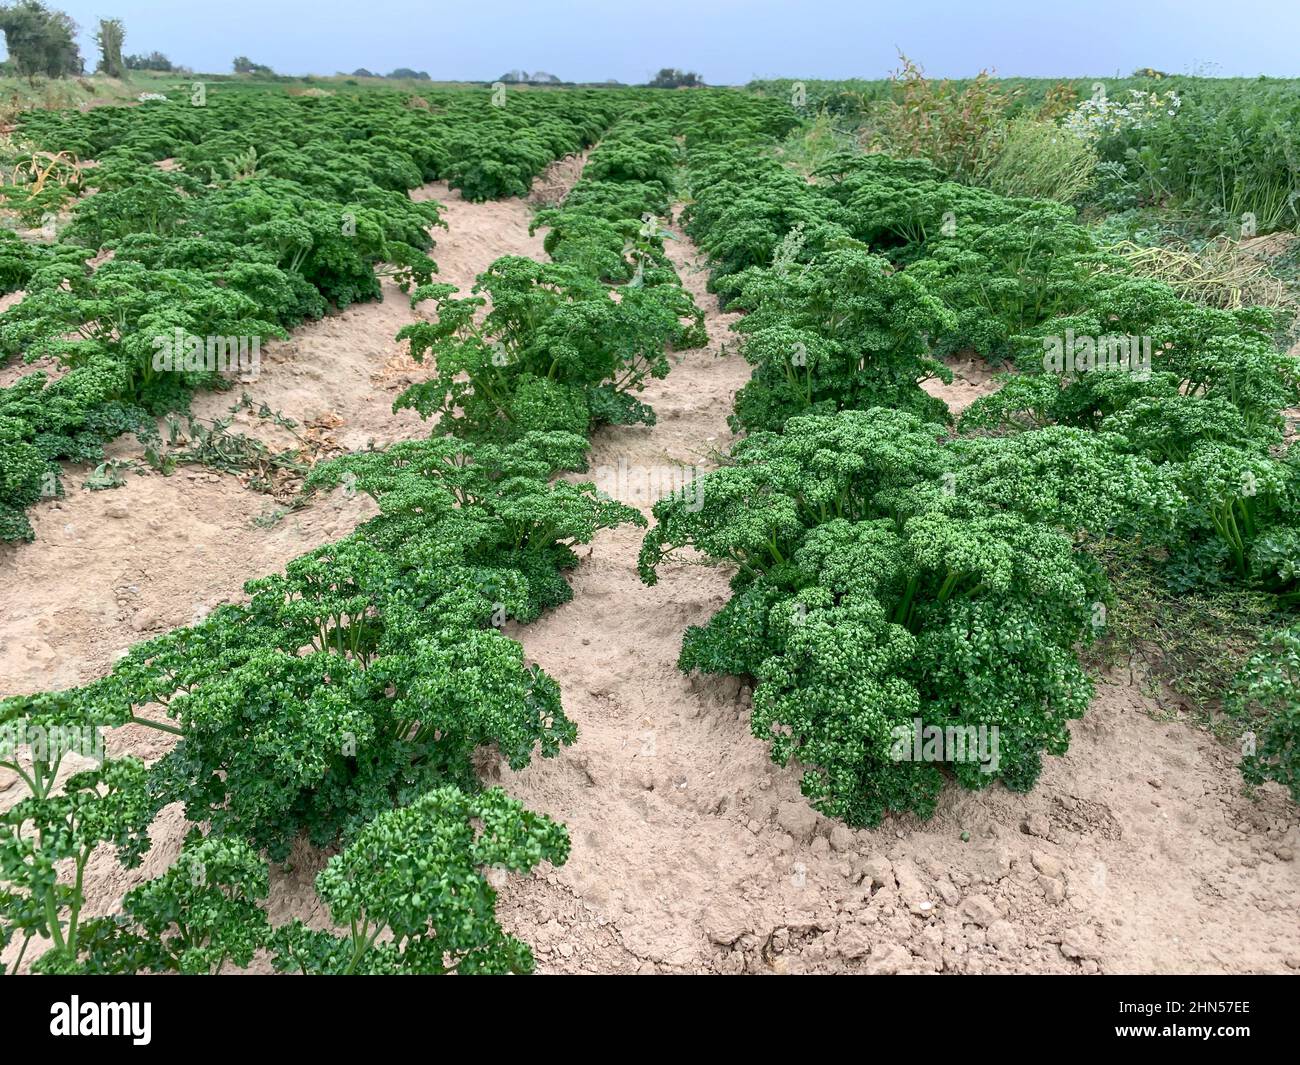 The Val de Saire in Normandy is known for the cultivation of premium vegetables such as kale in France Stock Photo